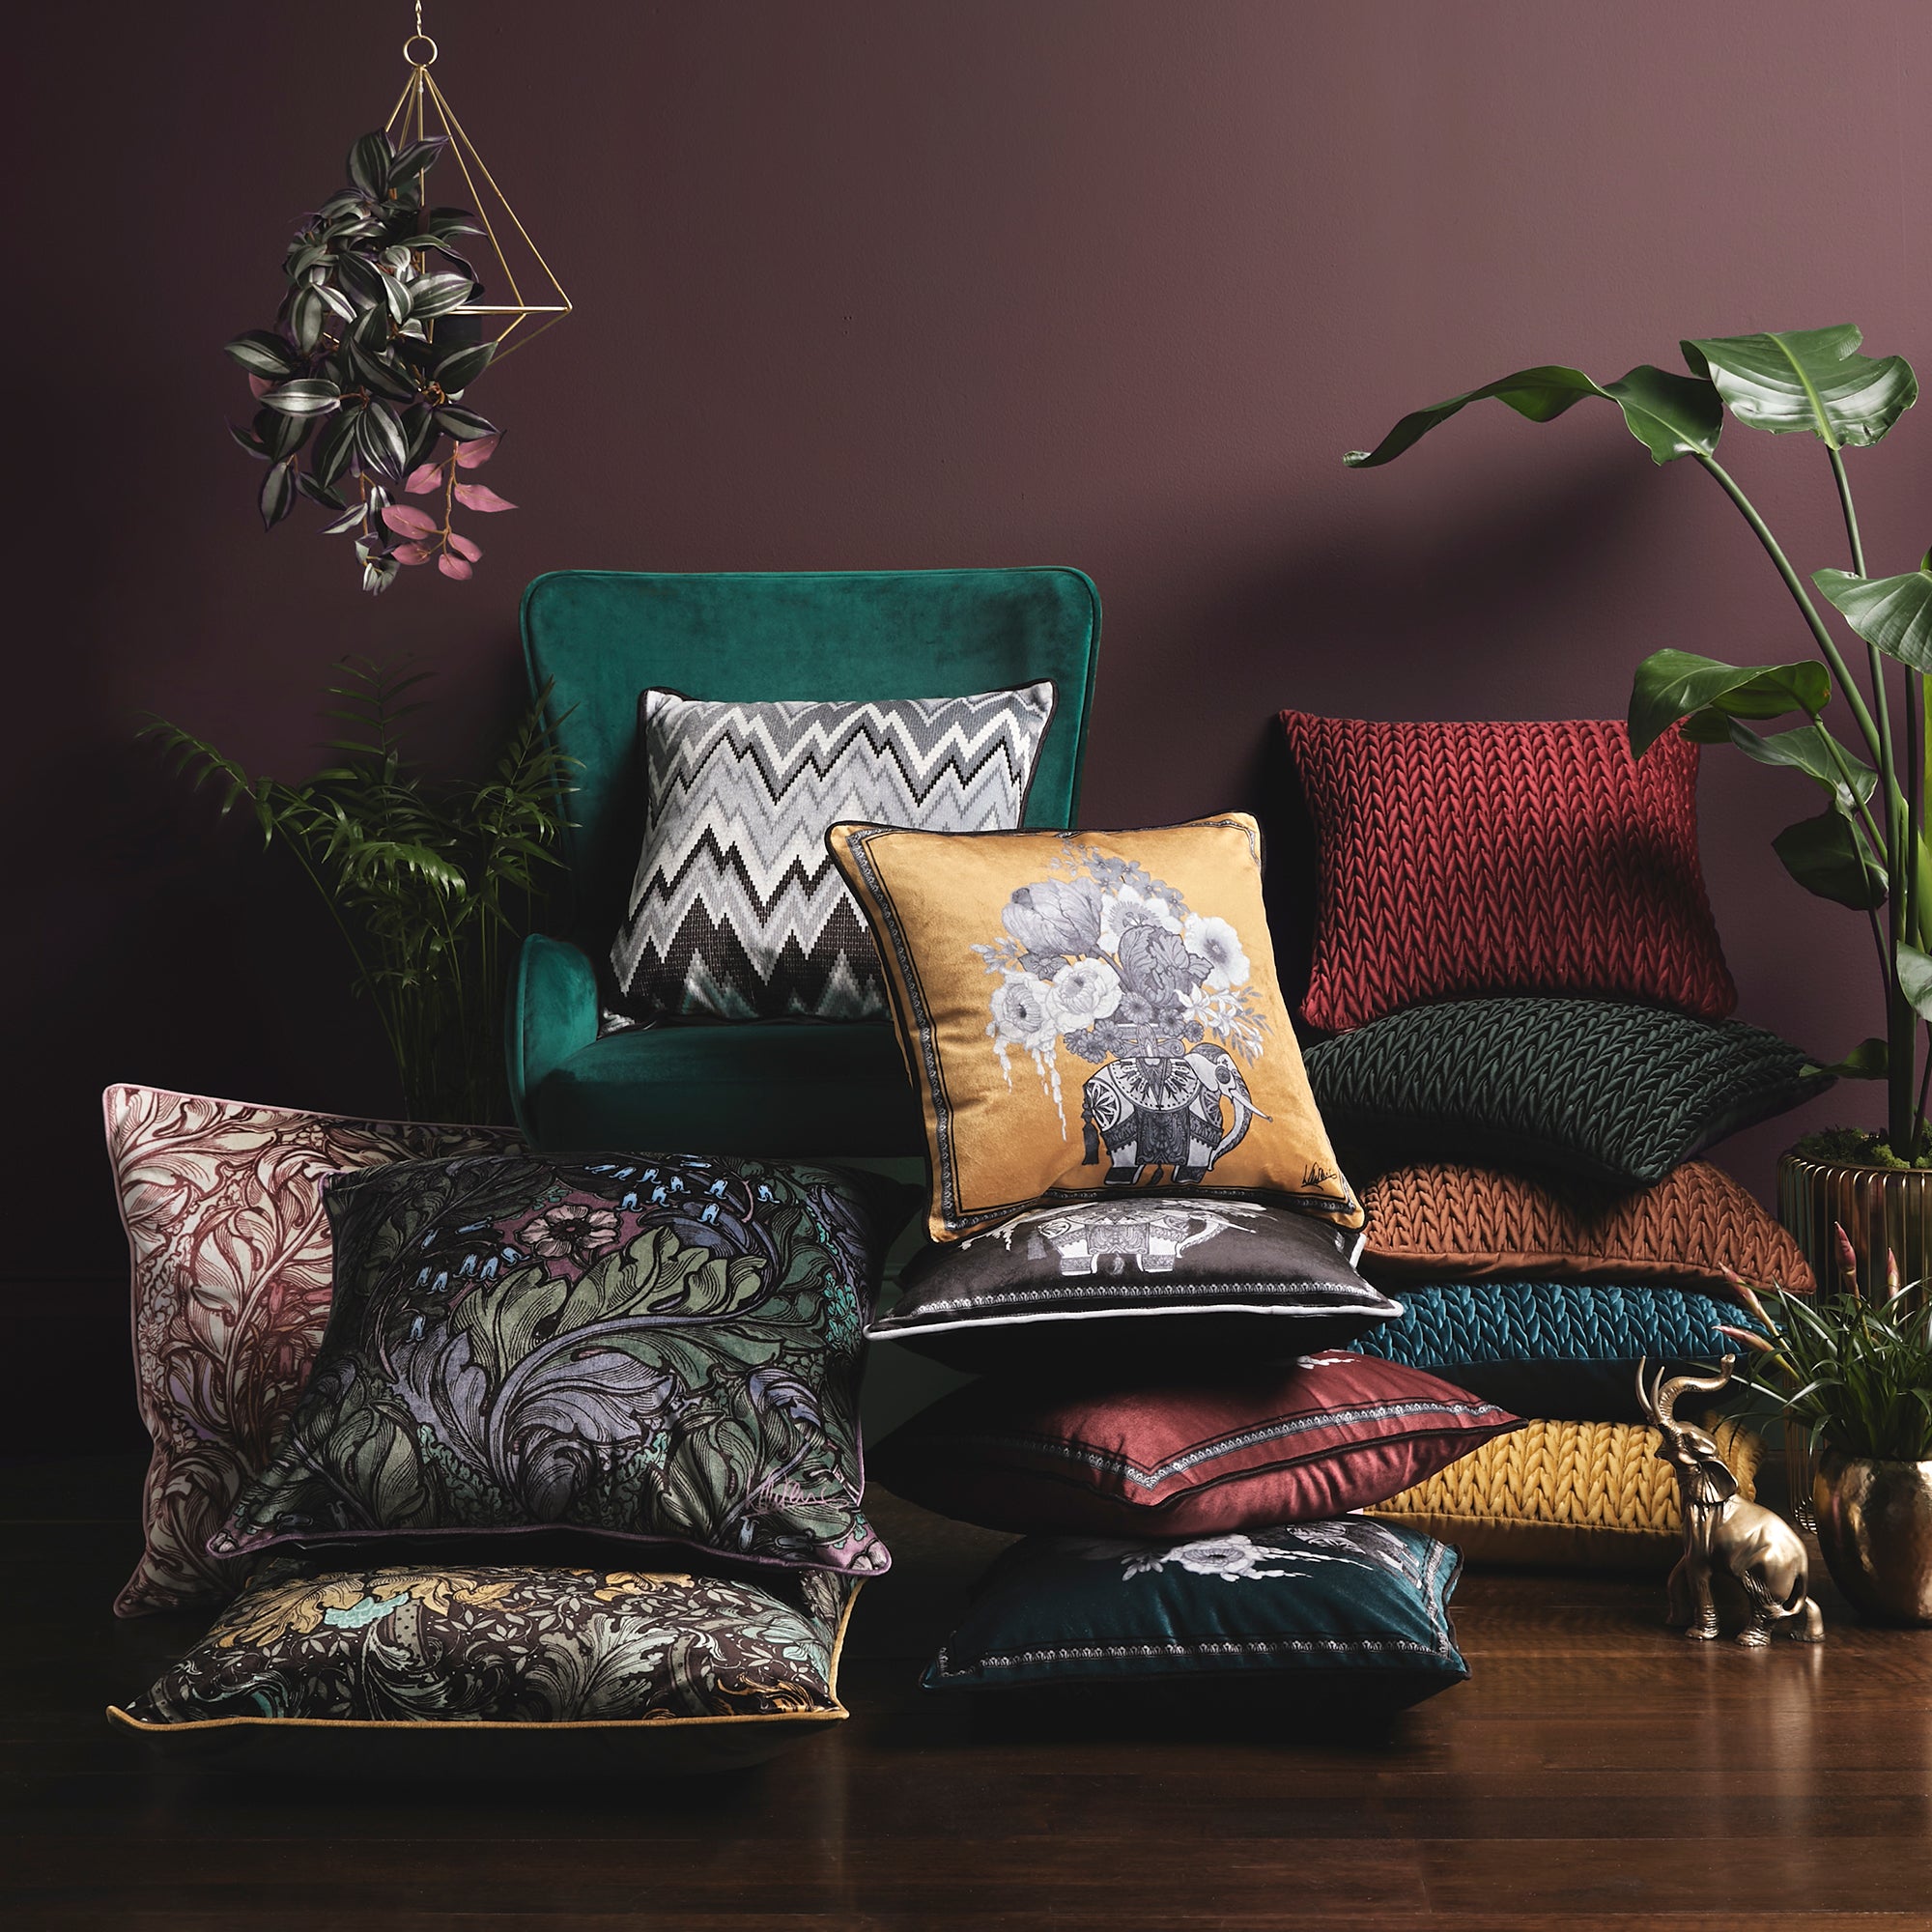 Filled Cushion Rambleicious by Laurence Llewelyn-Bowen in Claret